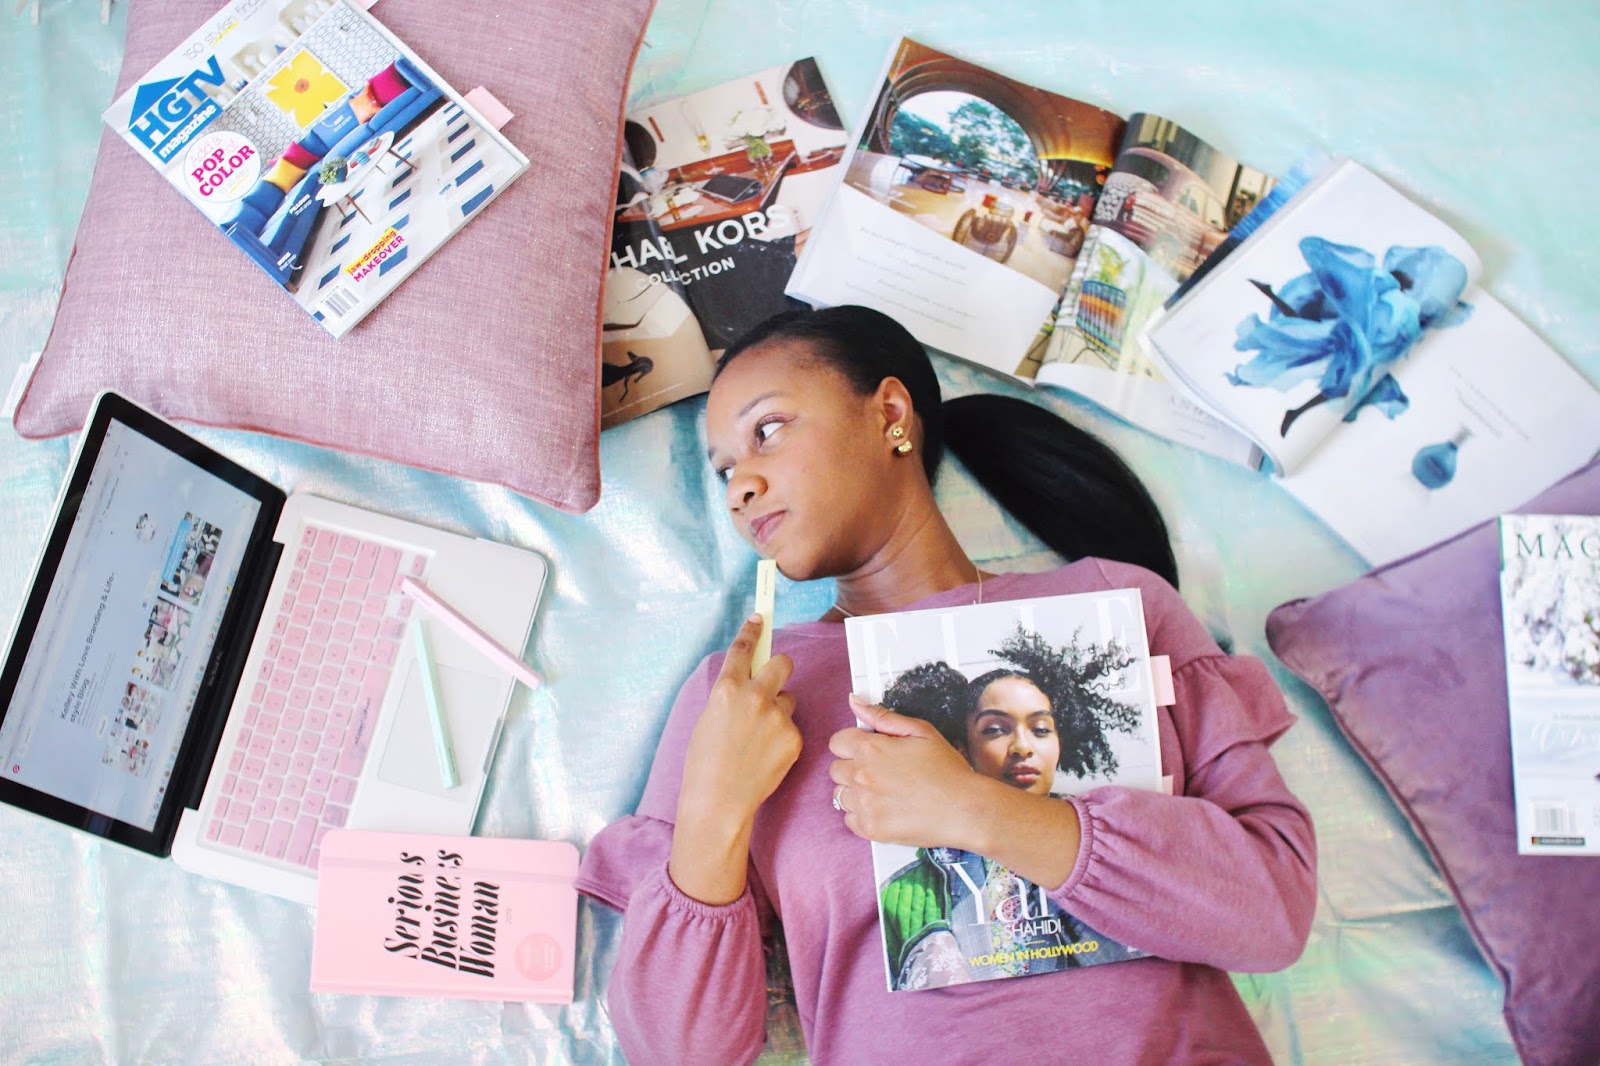 How To Create a Digital Vision Board — Rachelle Welling Photography